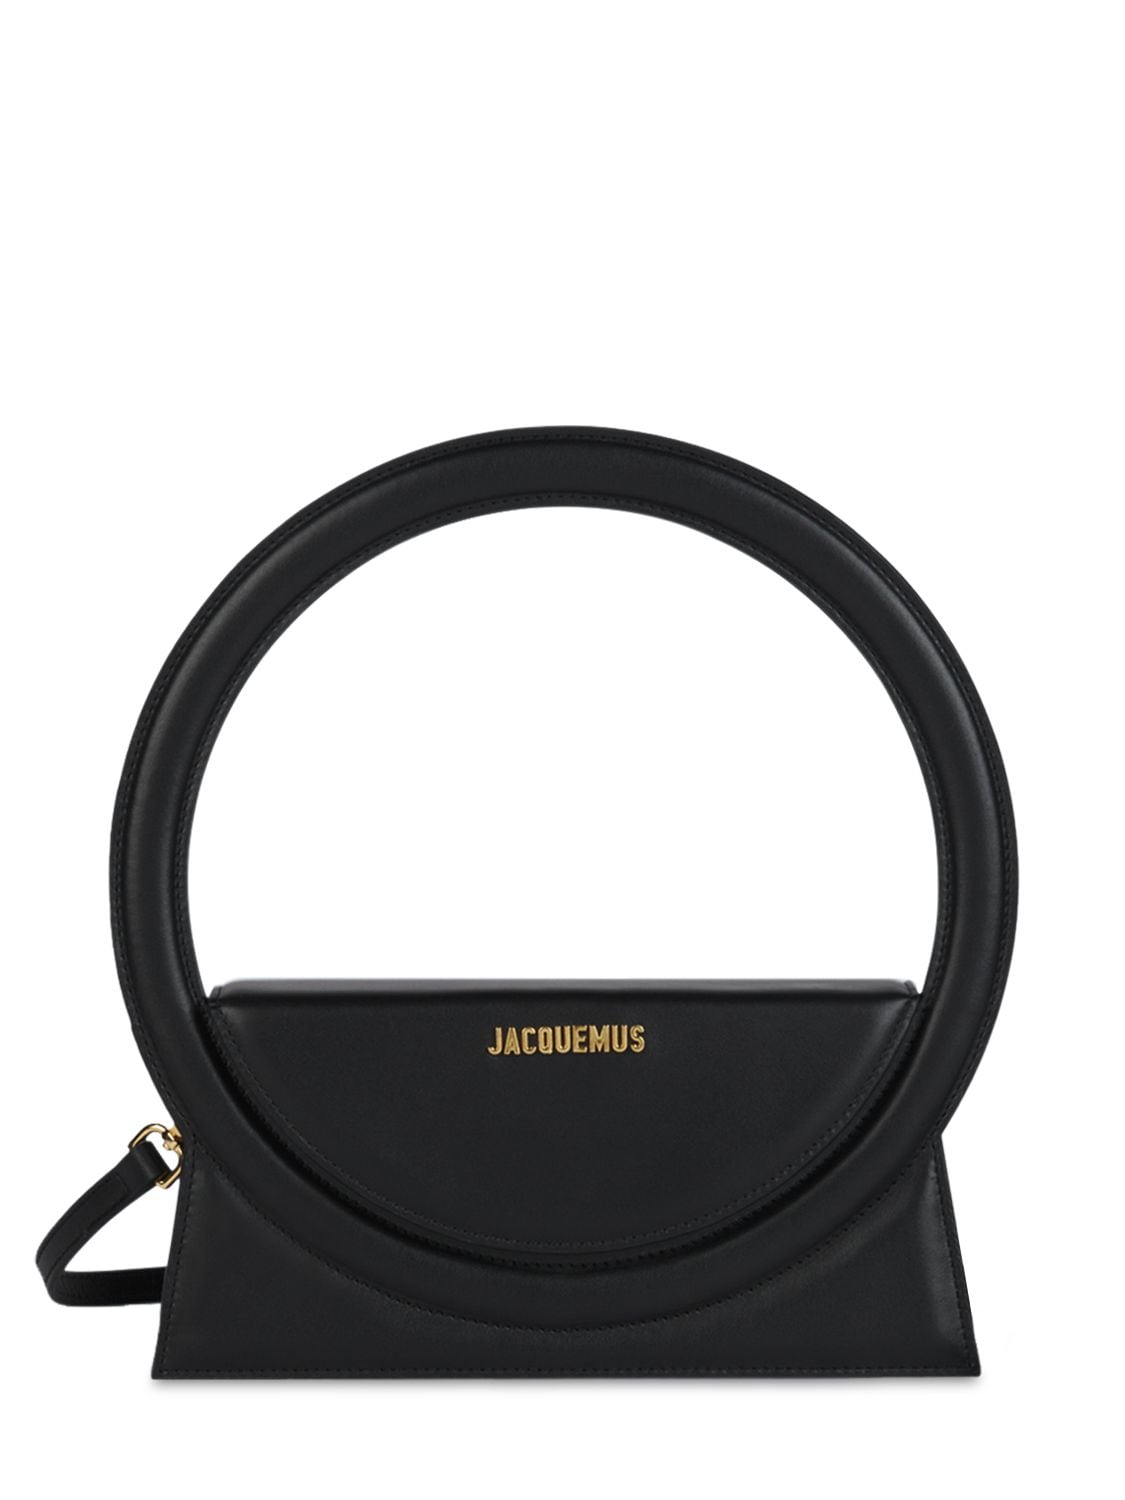 Jacquemus Le Sac Round Leather Top Handle Bag In Чёрный